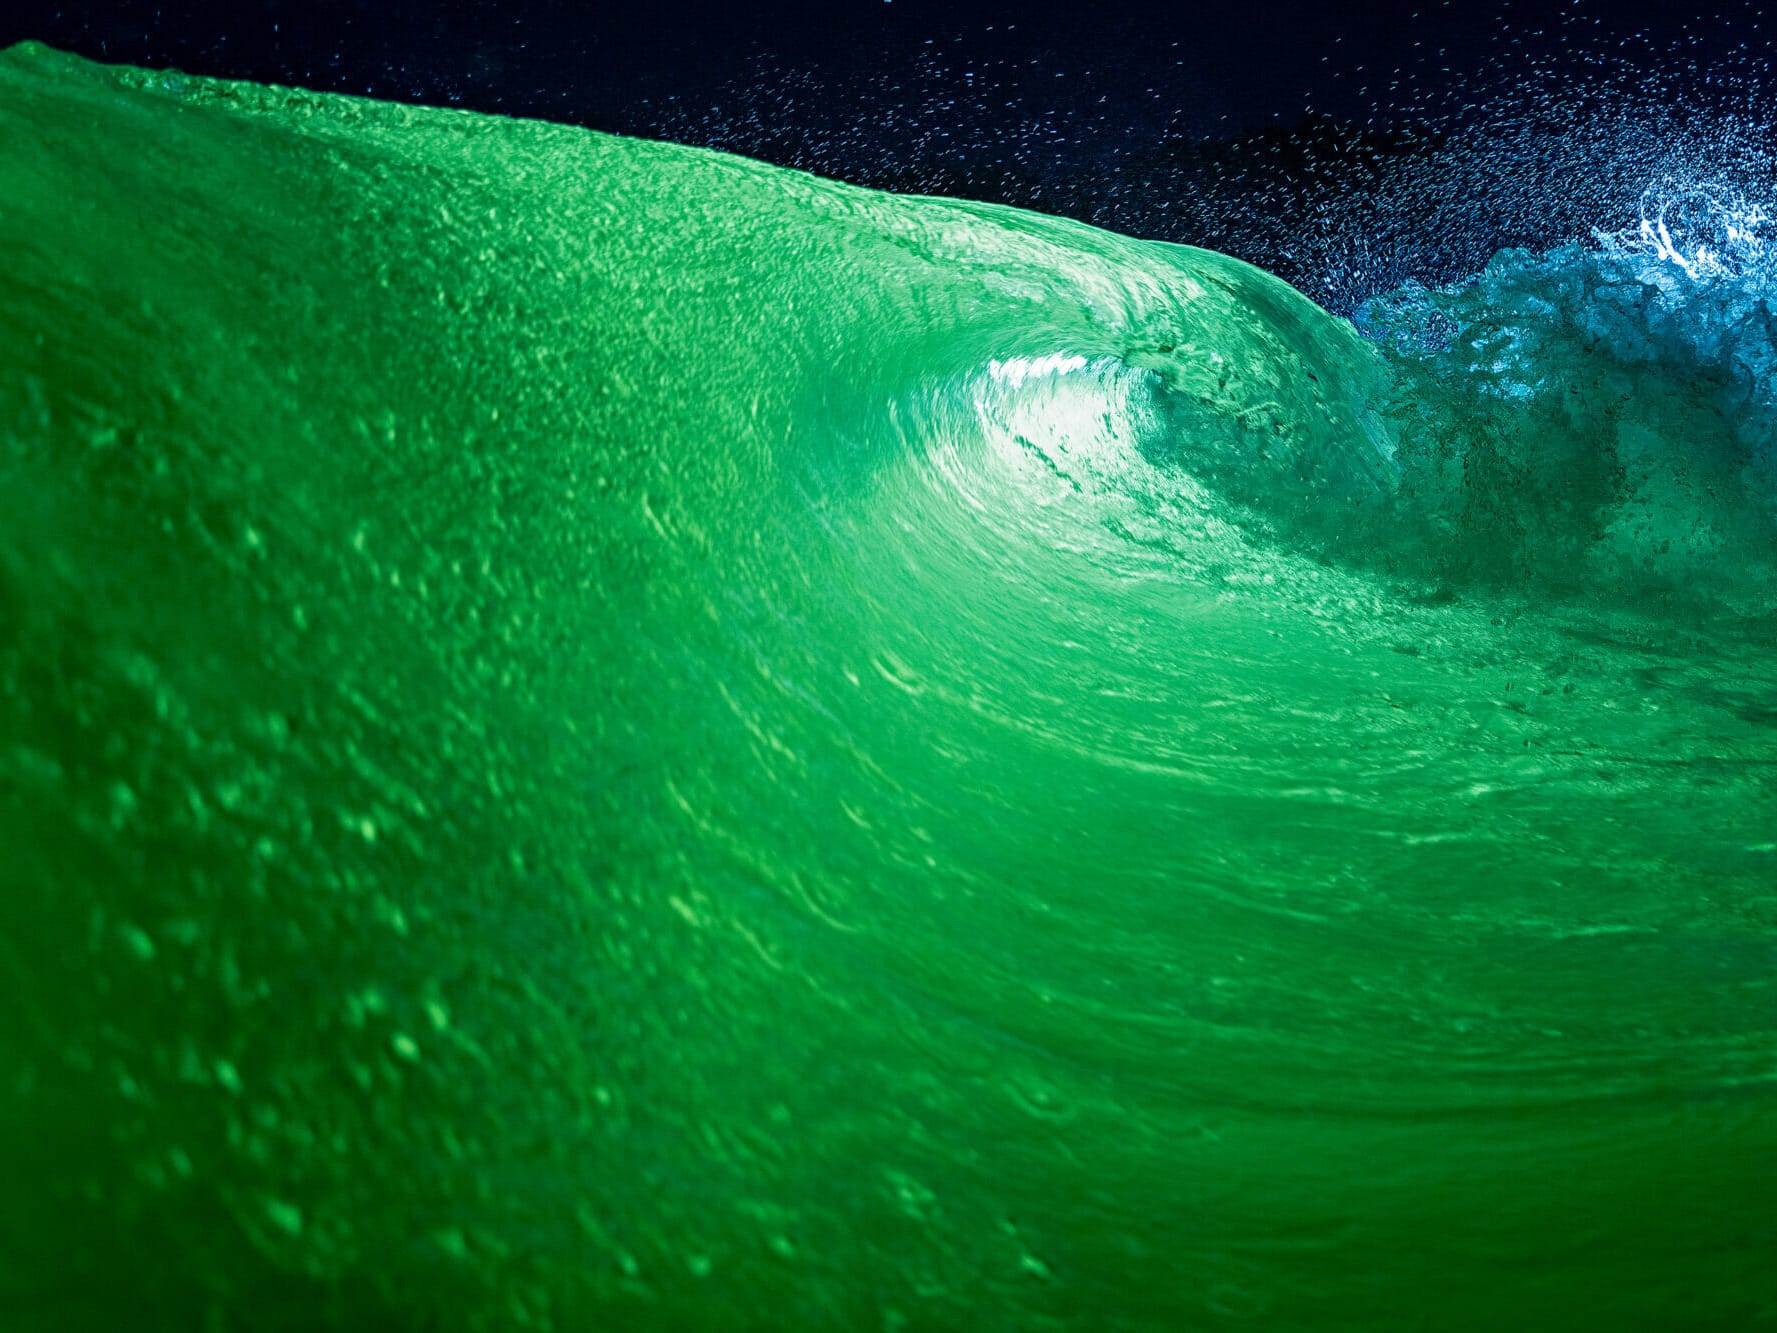 A green wave created by a wakesurf boat.